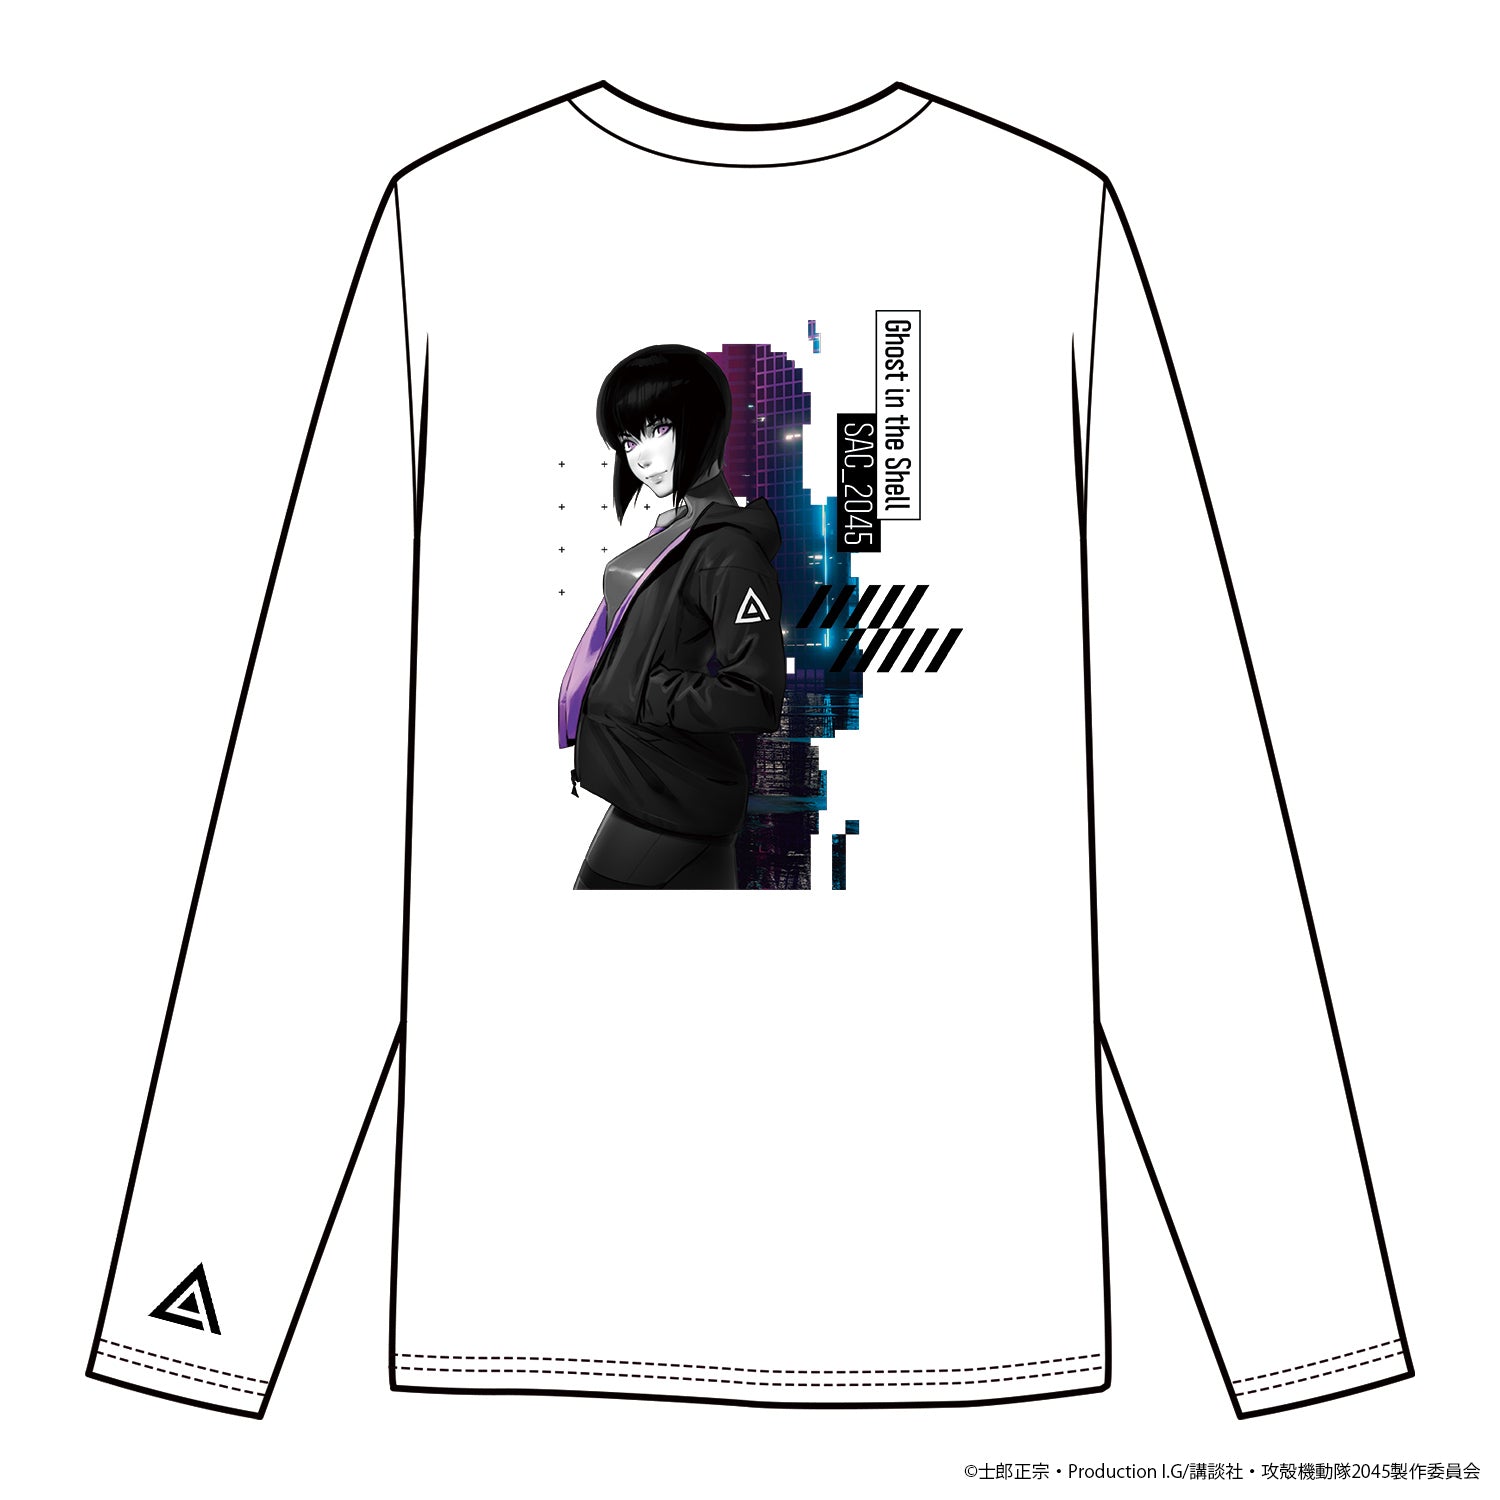 Ghost in the shell tシャツ 攻殻機動隊